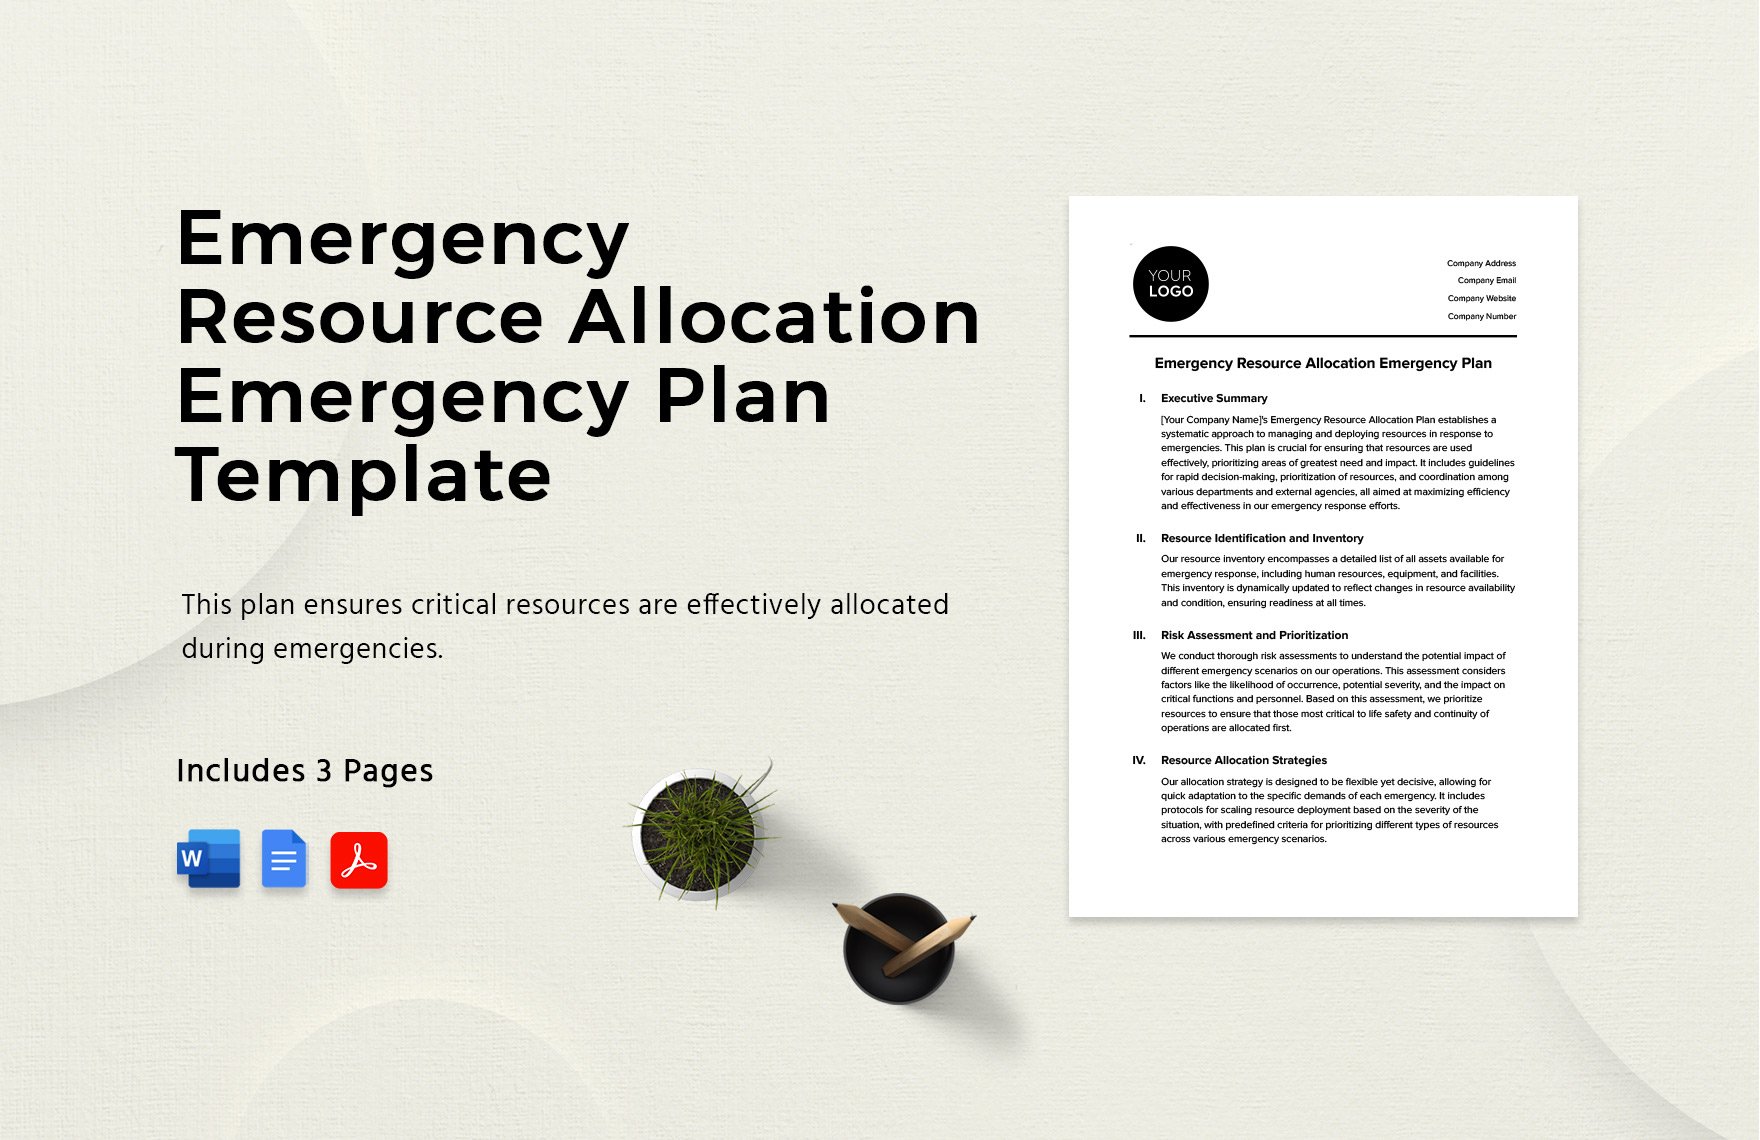 Emergency Resource Allocation Emergency Plan Template